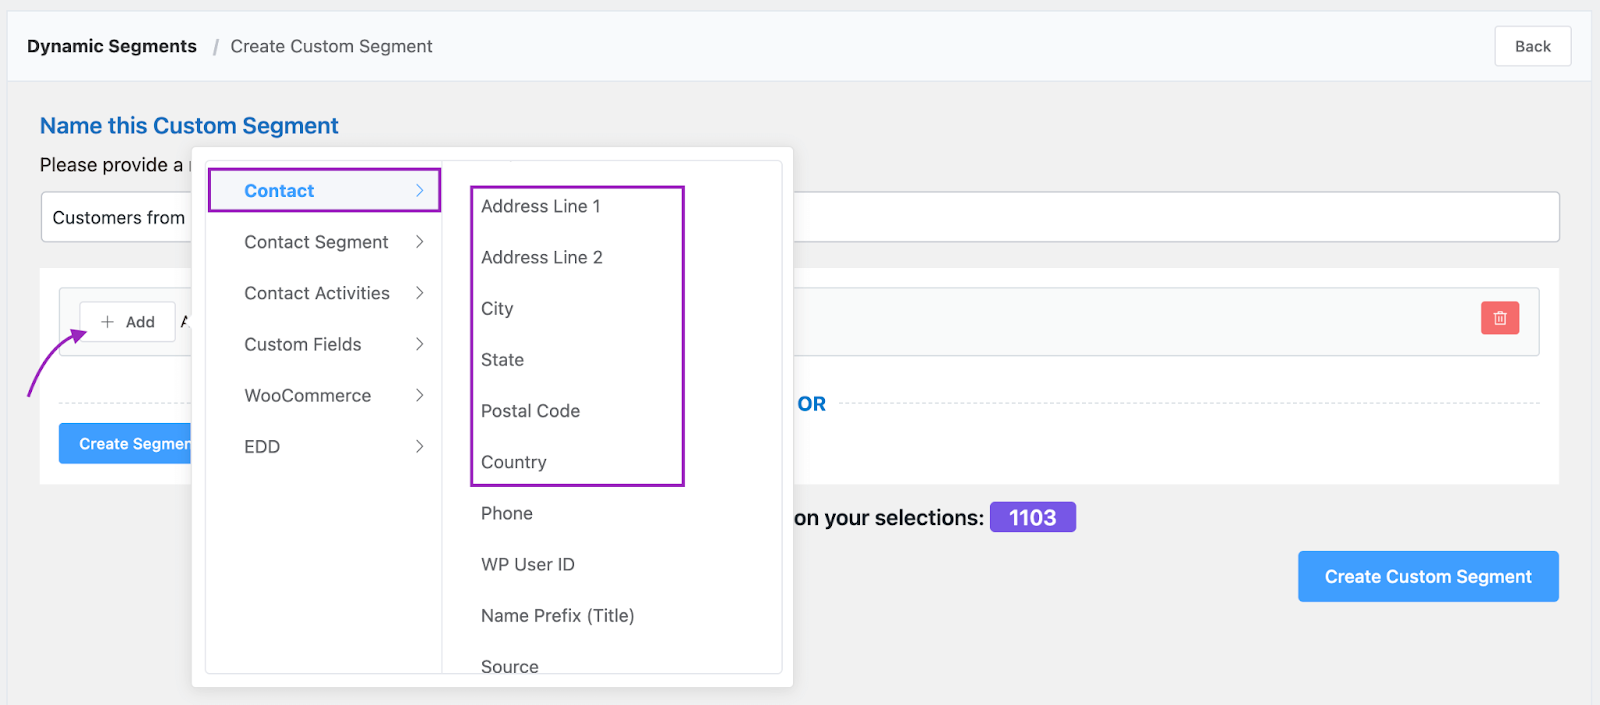 Geographic segmentation in marketing: Segmenting Contacts with FluentCRM.